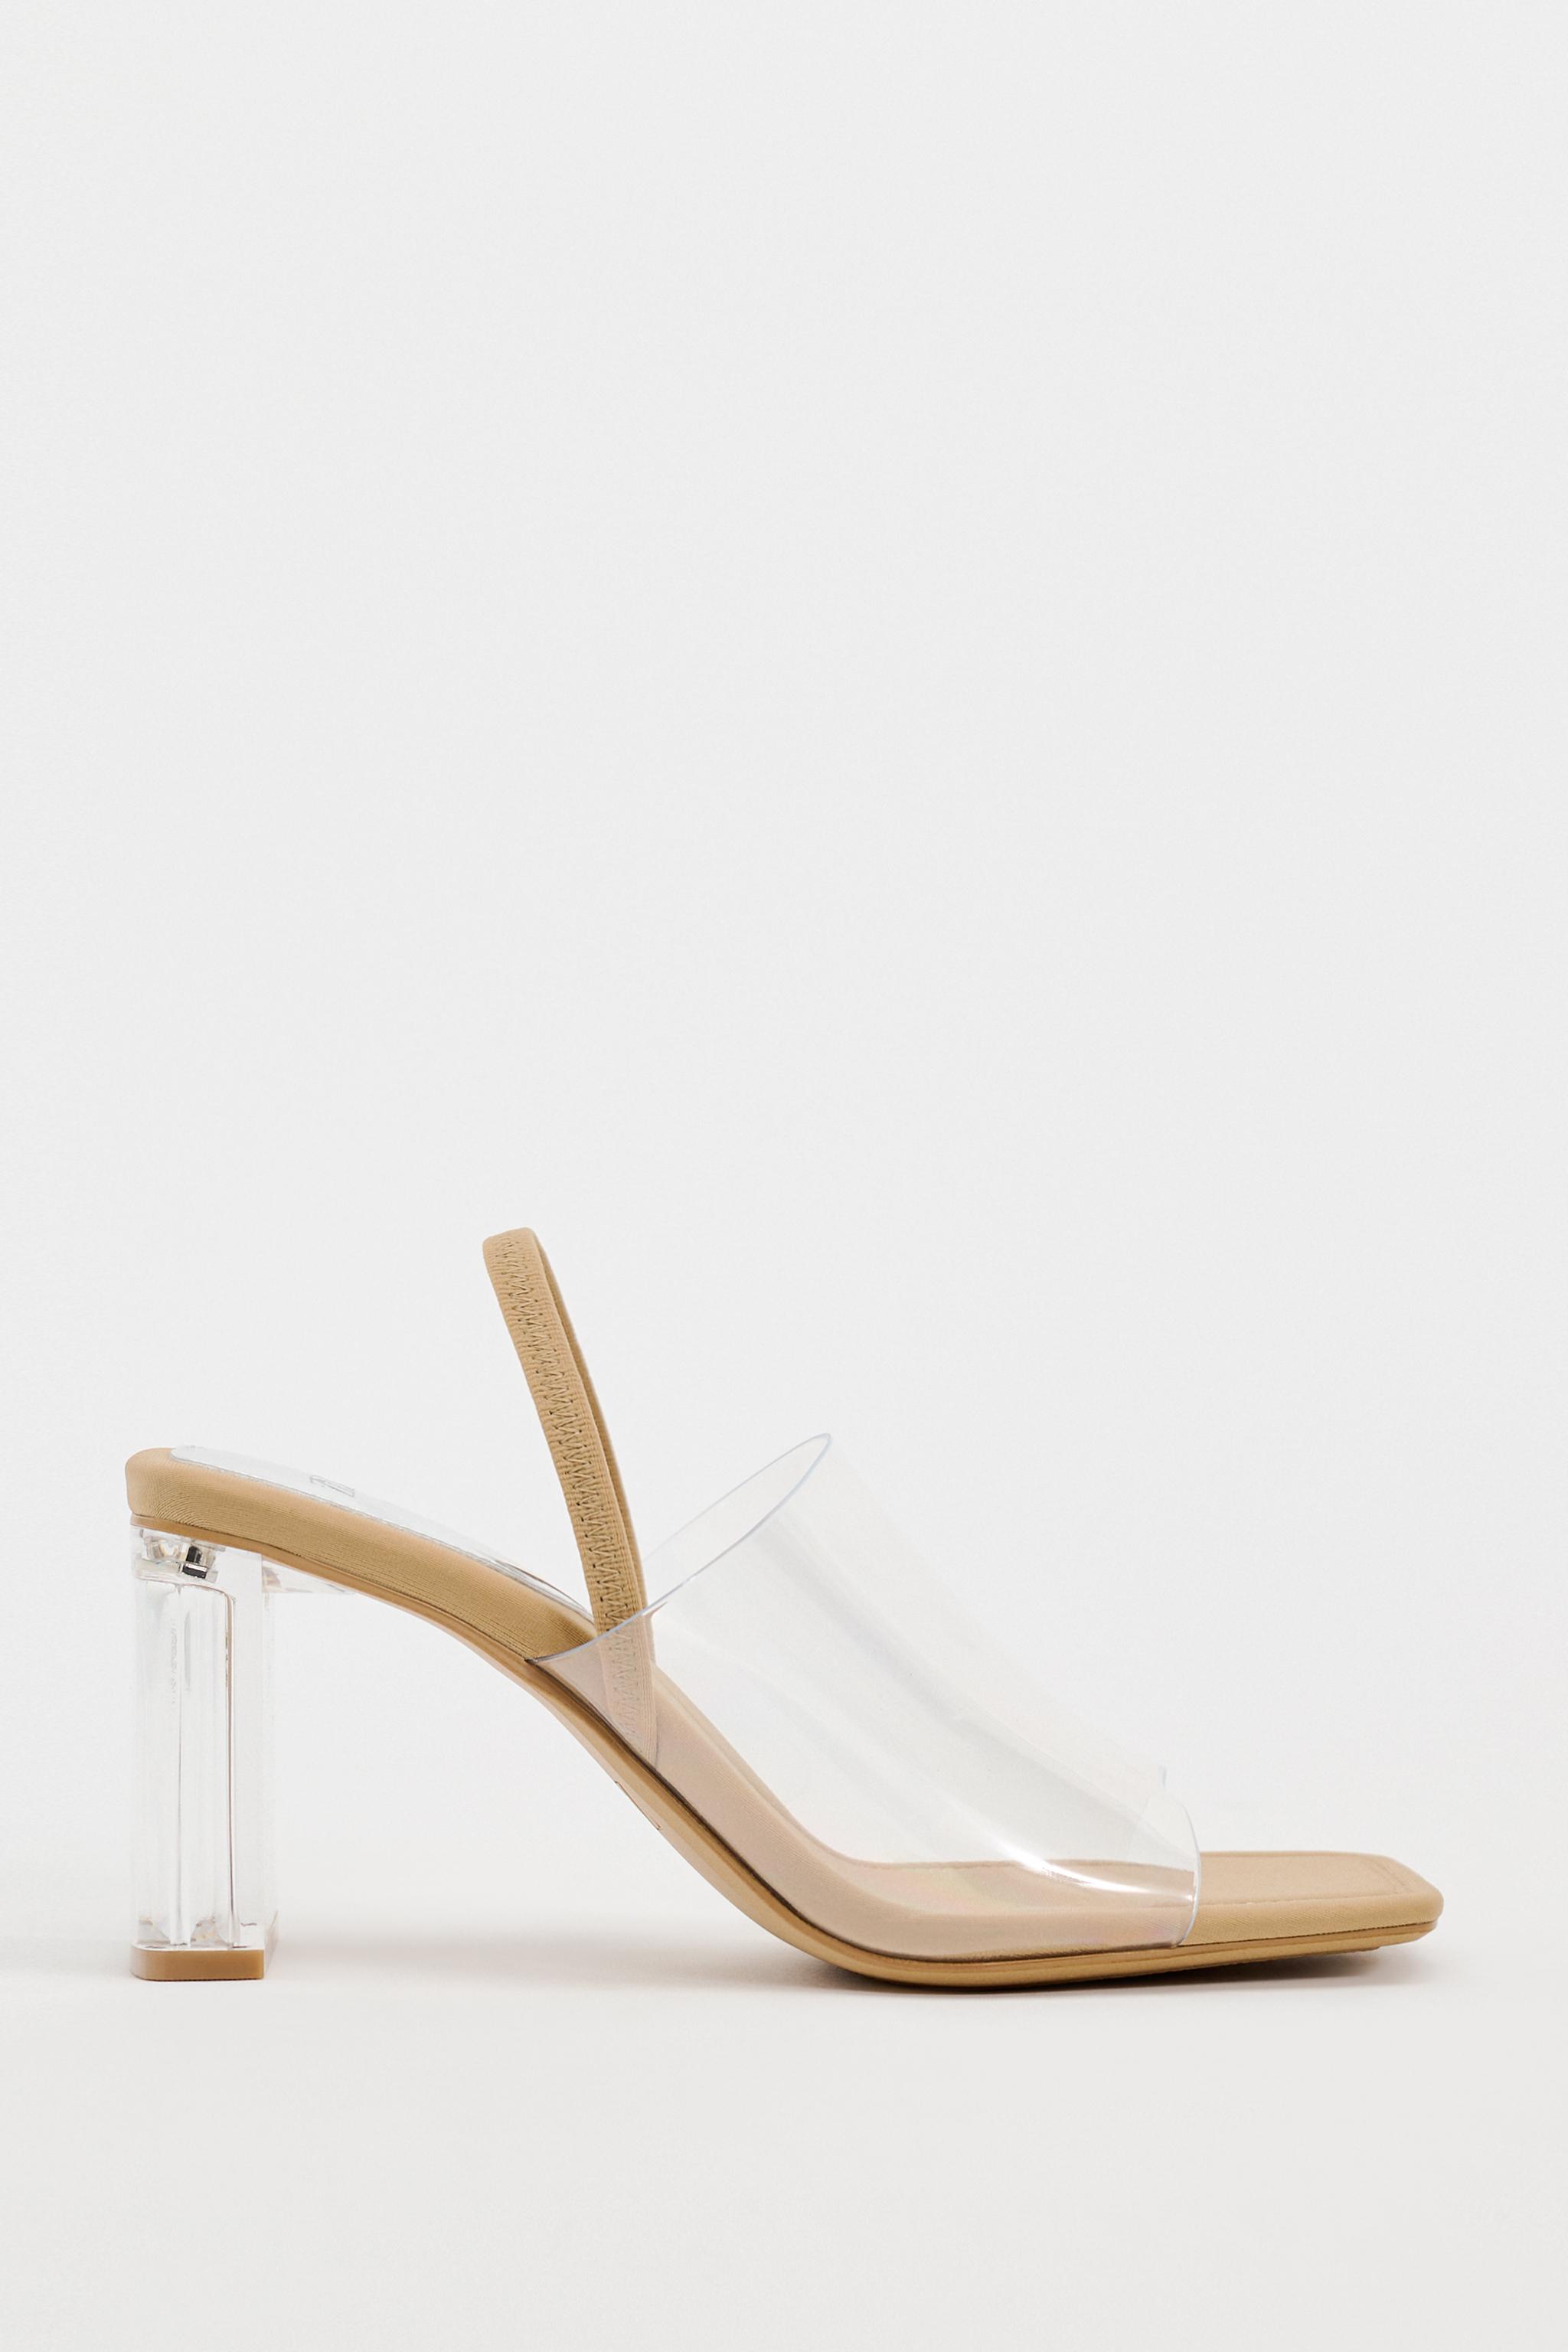 Women's Clear Heels, Explore our New Arrivals